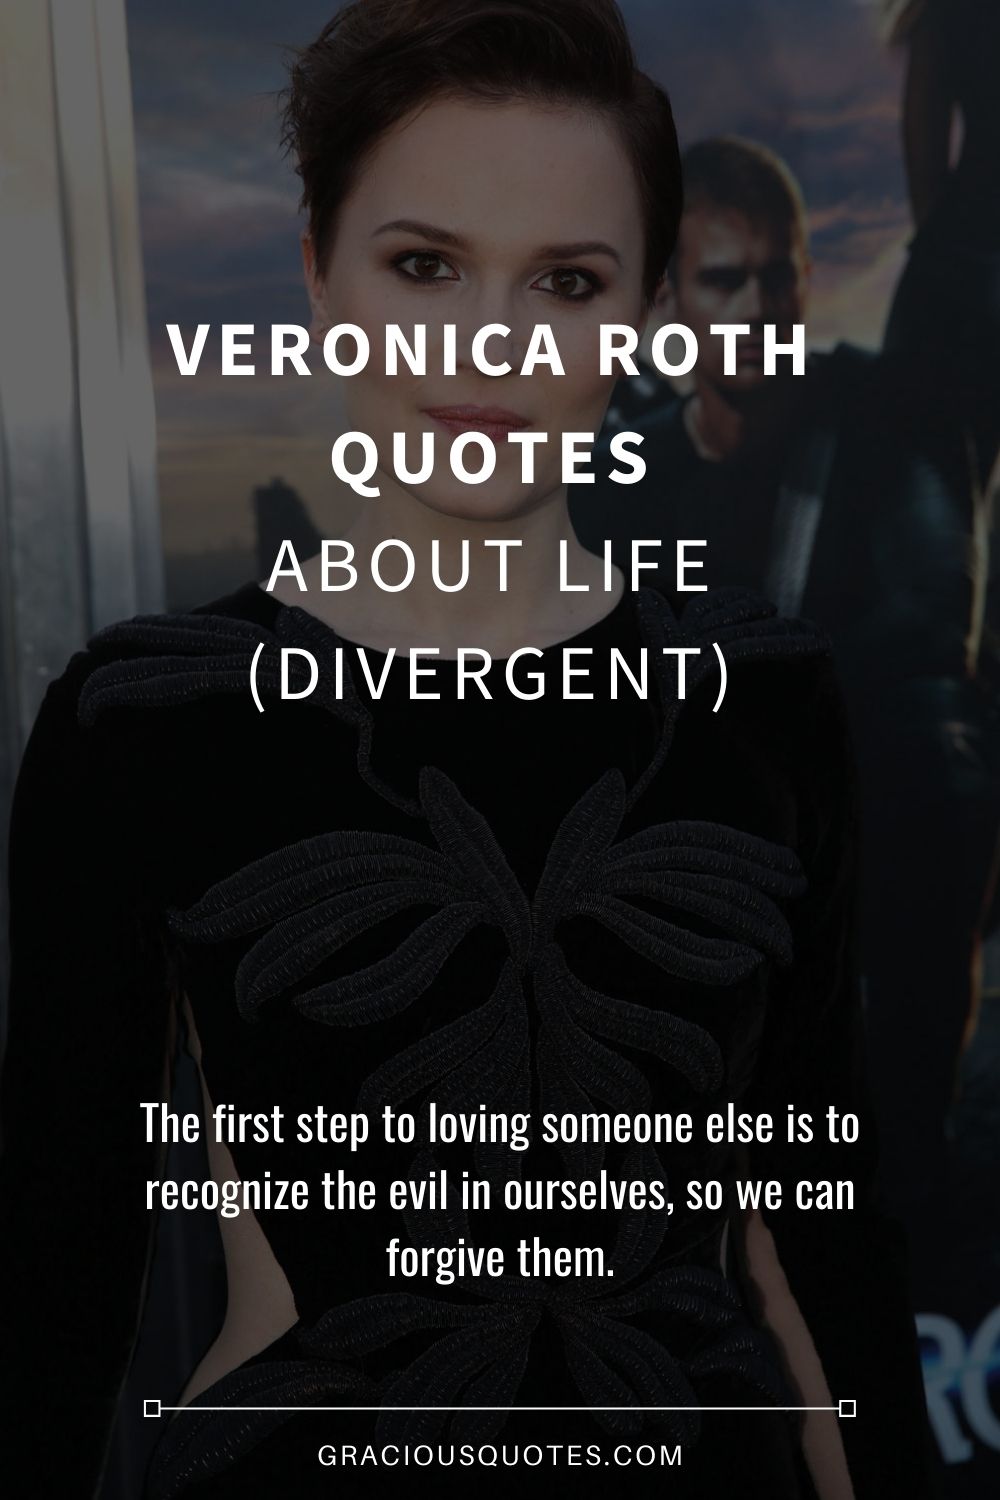 Veronica Roth Quotes About Life (DIVERGENT) - Gracious Quotes